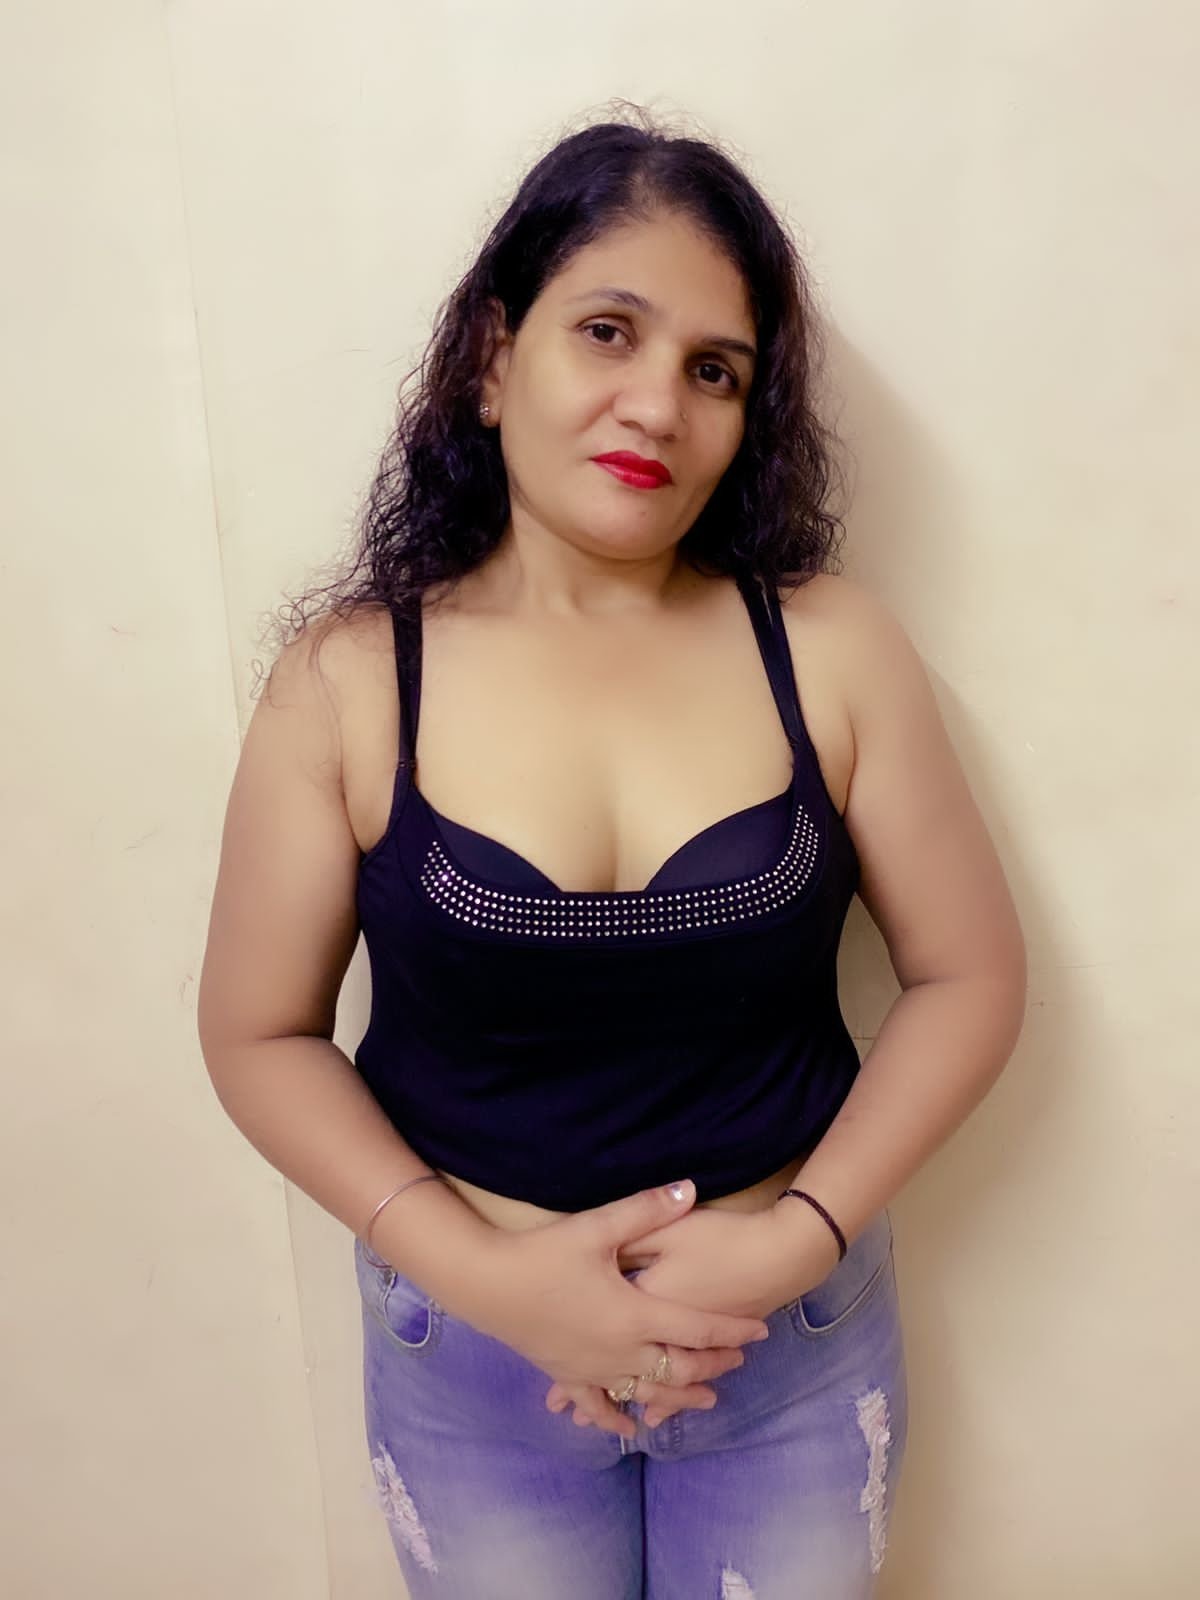 contact escort housewife in mumbai no Sex Images Hq